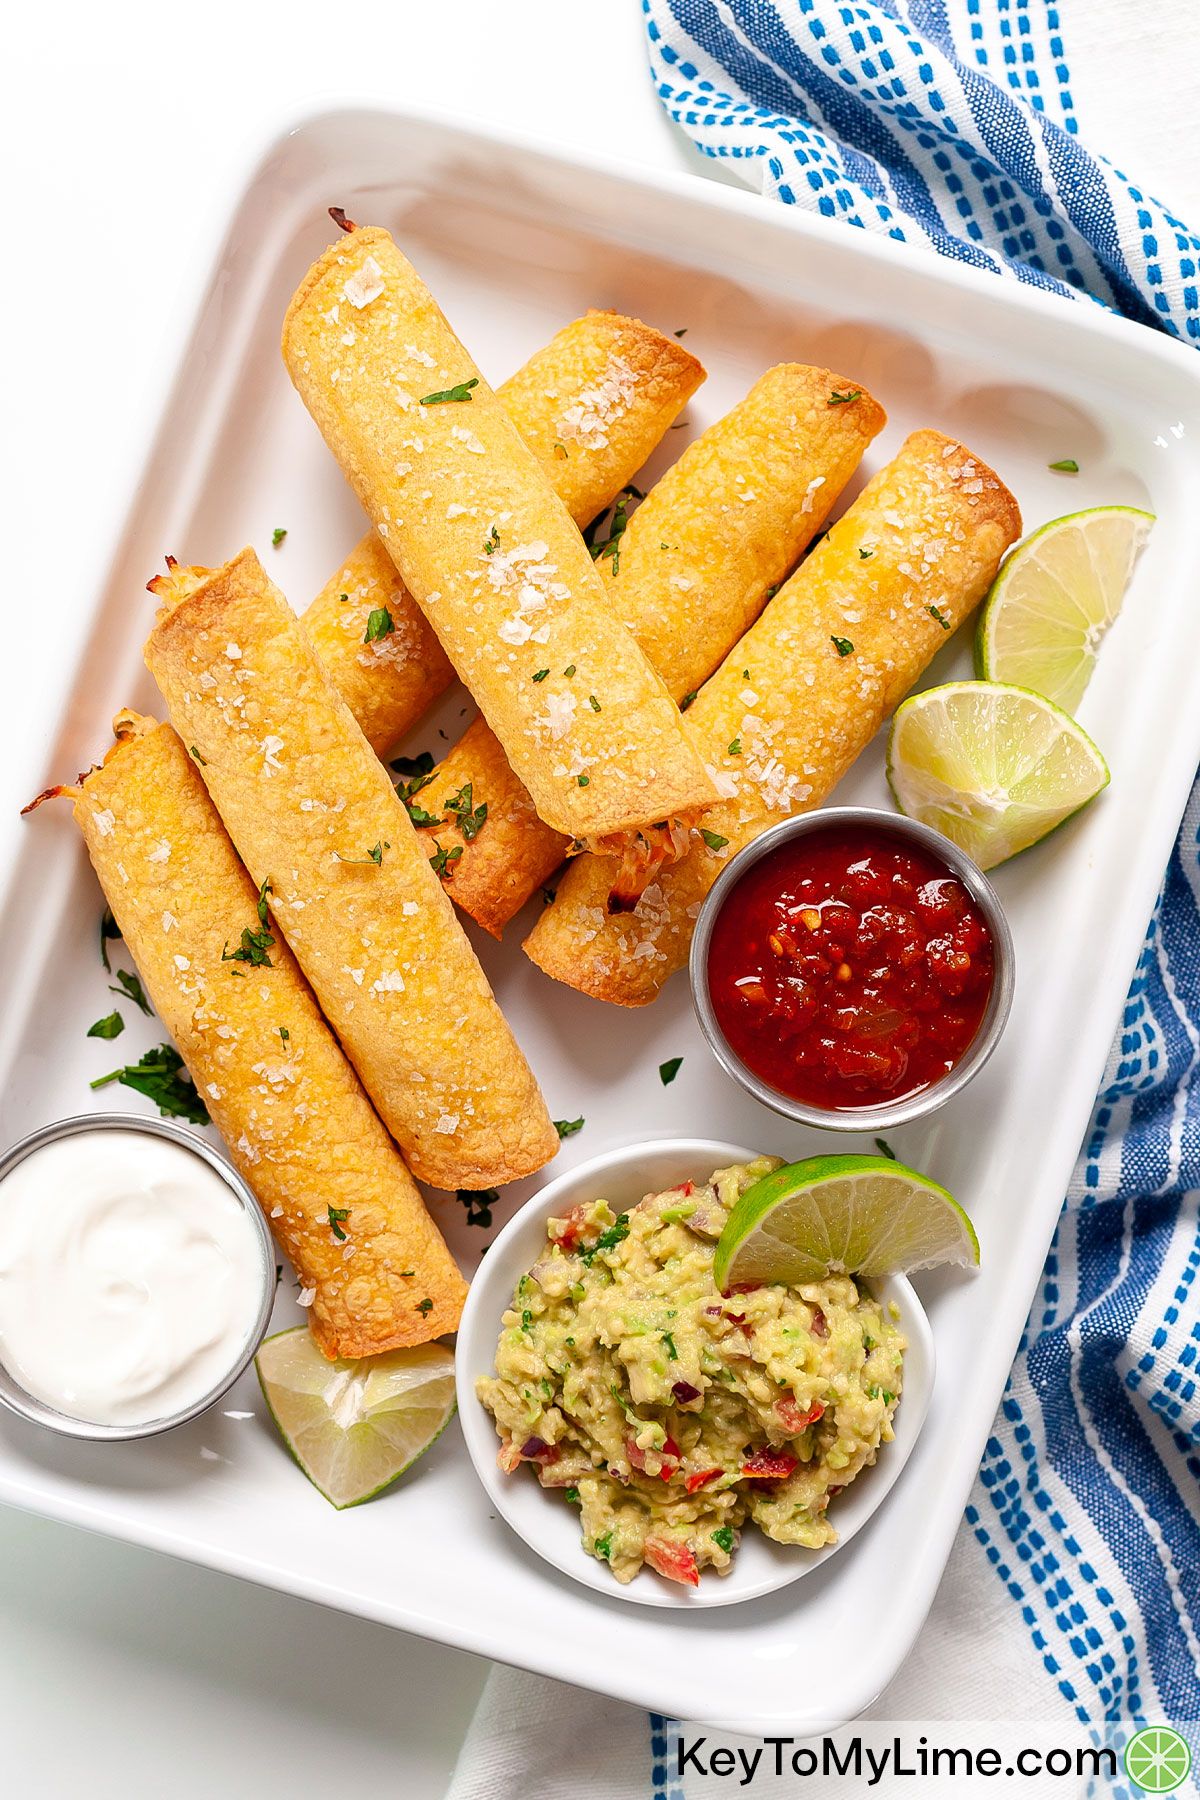 Chicken taquitos with salsa, guacamole, and sour cream.